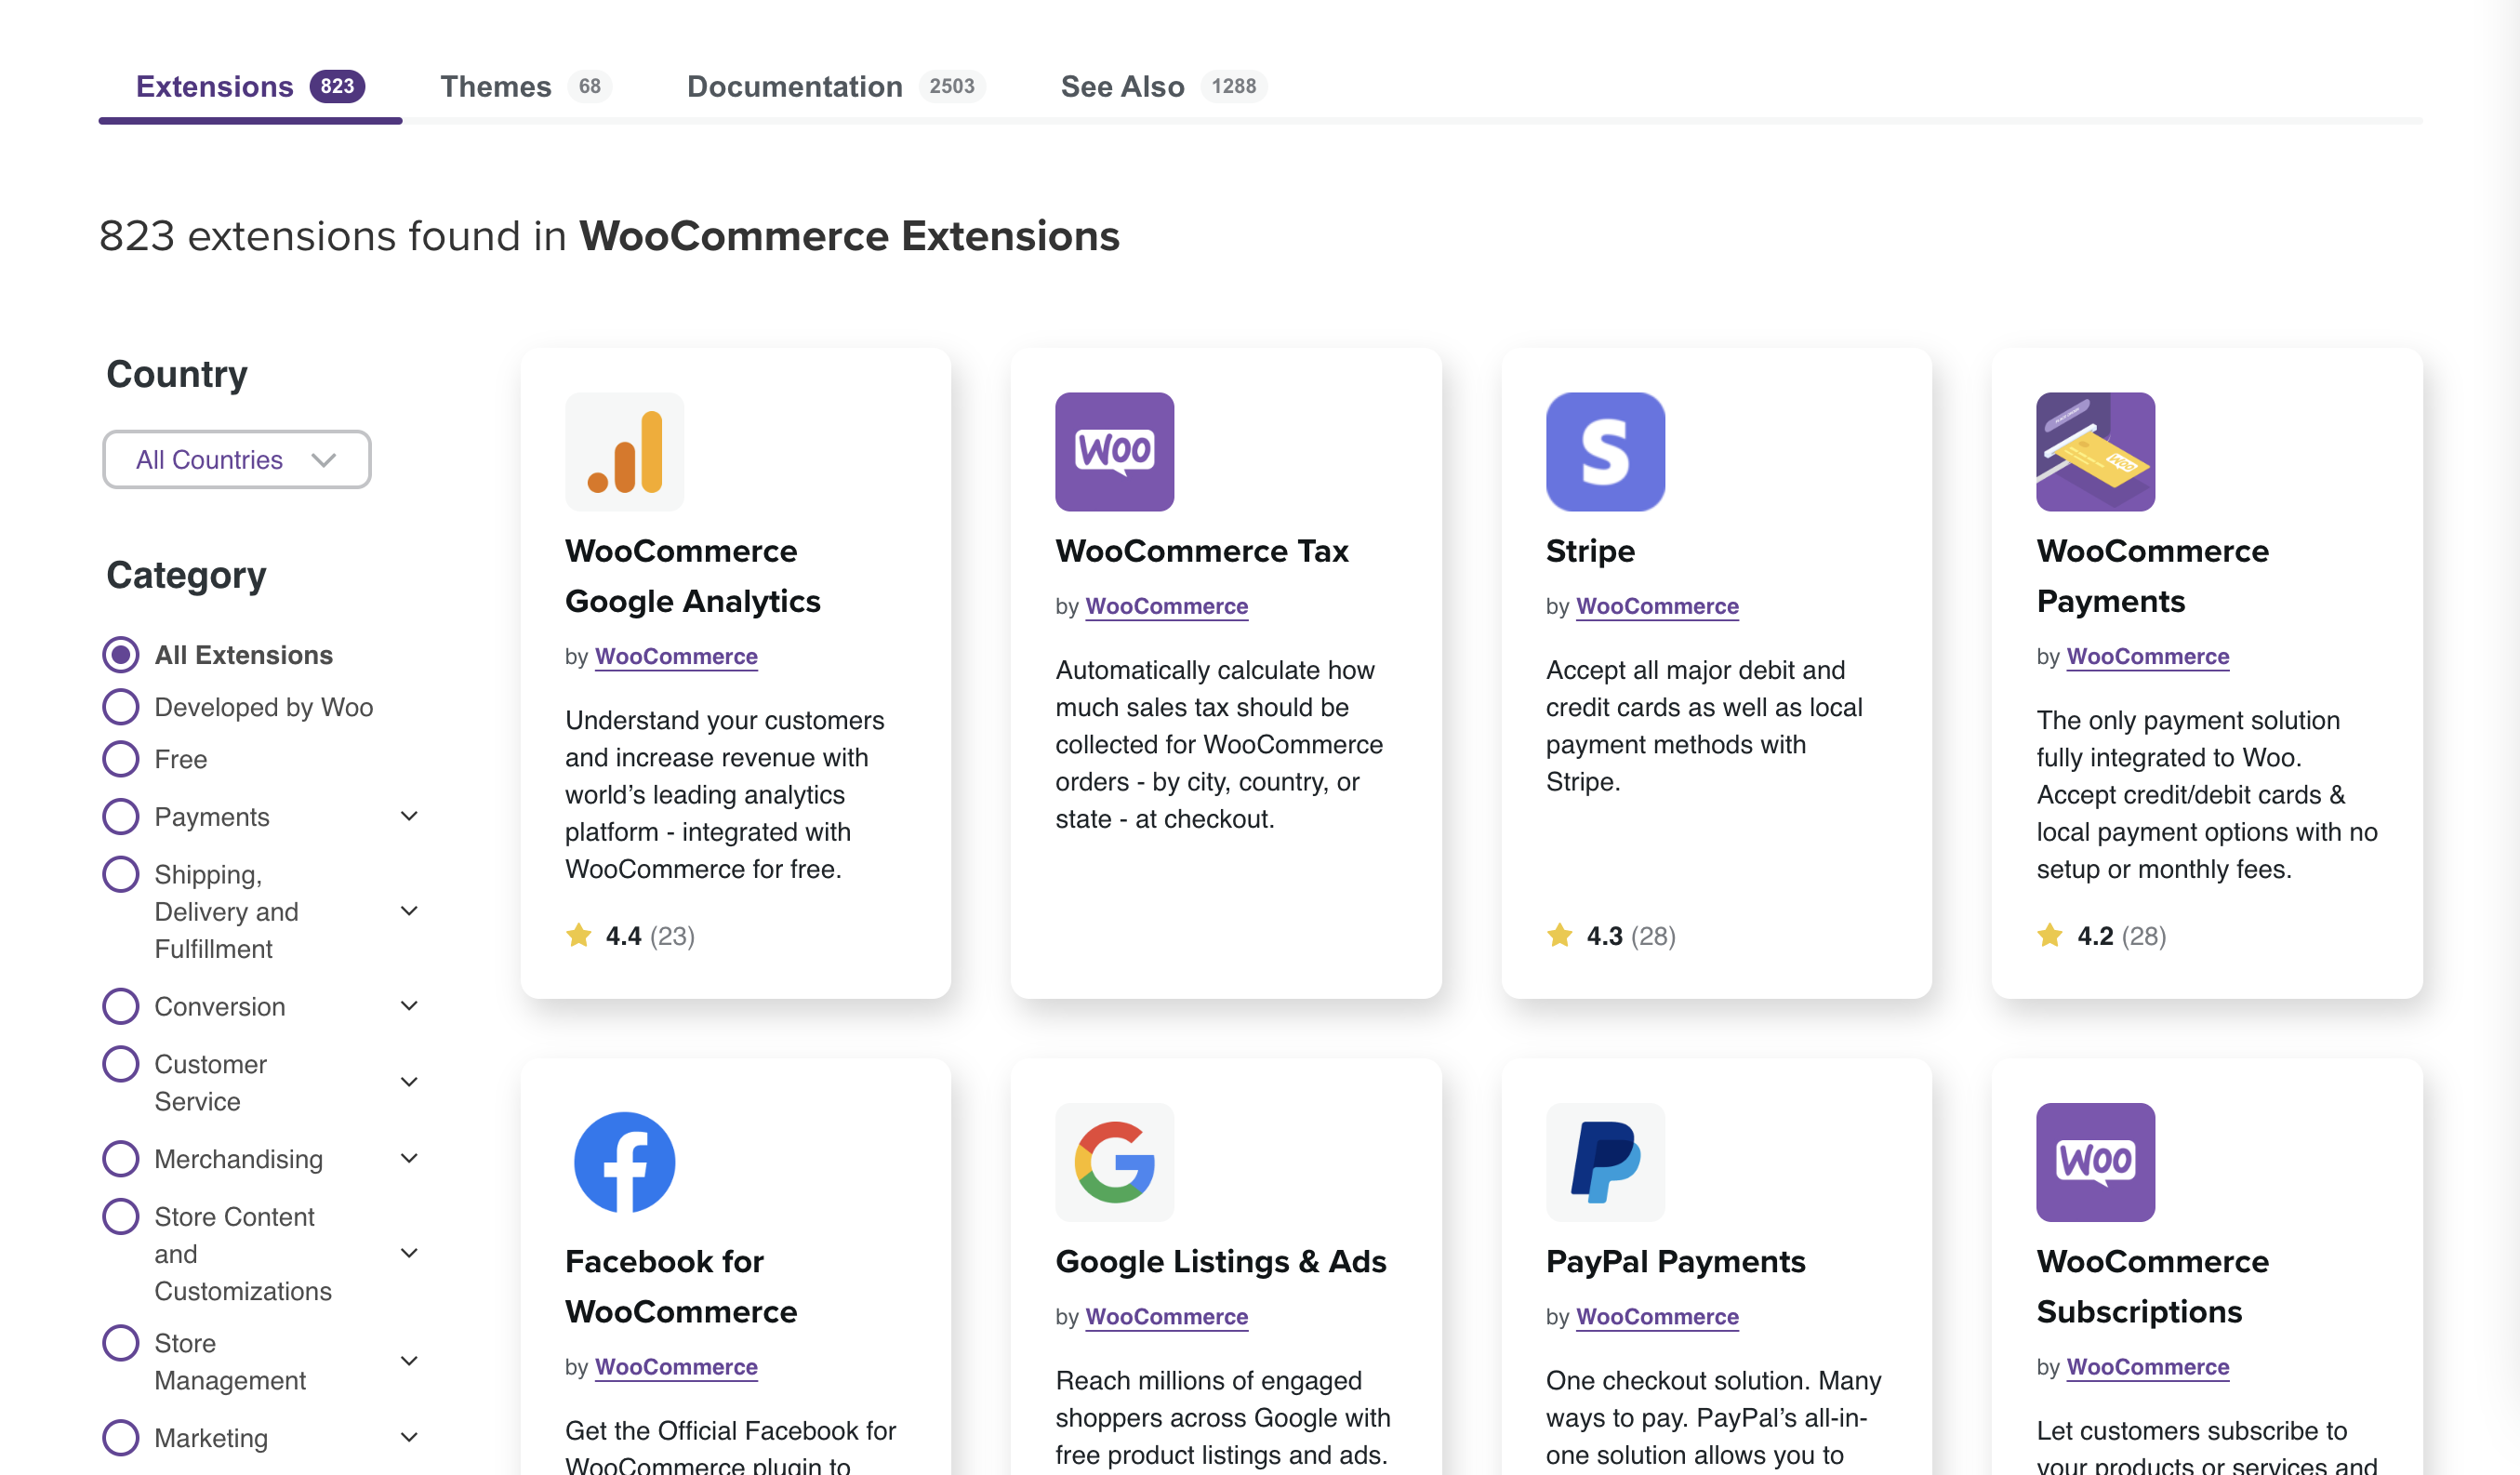 WooCommerce Extensions Store page